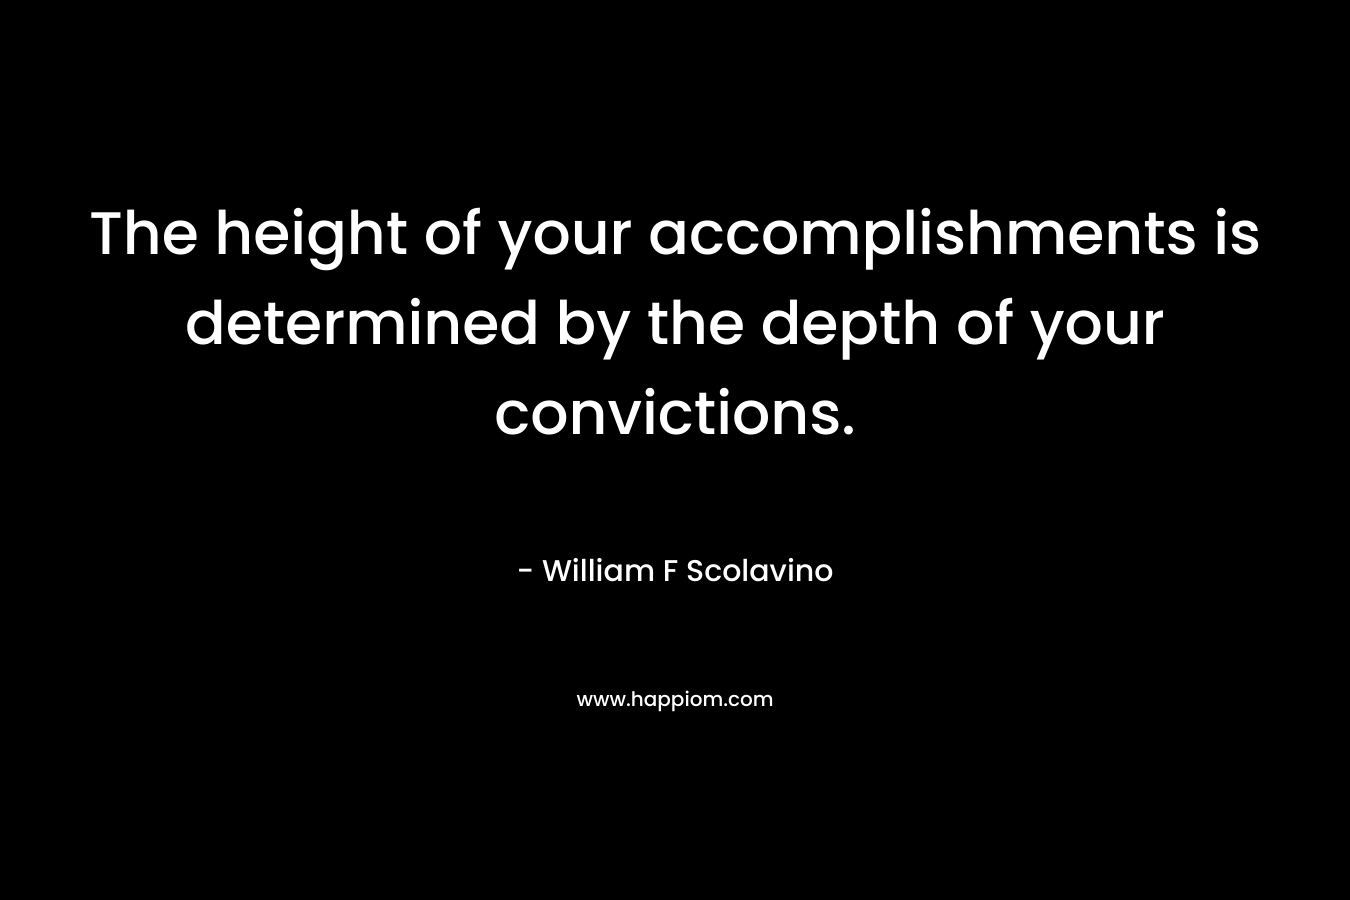 The height of your accomplishments is determined by the depth of your convictions. – William F Scolavino